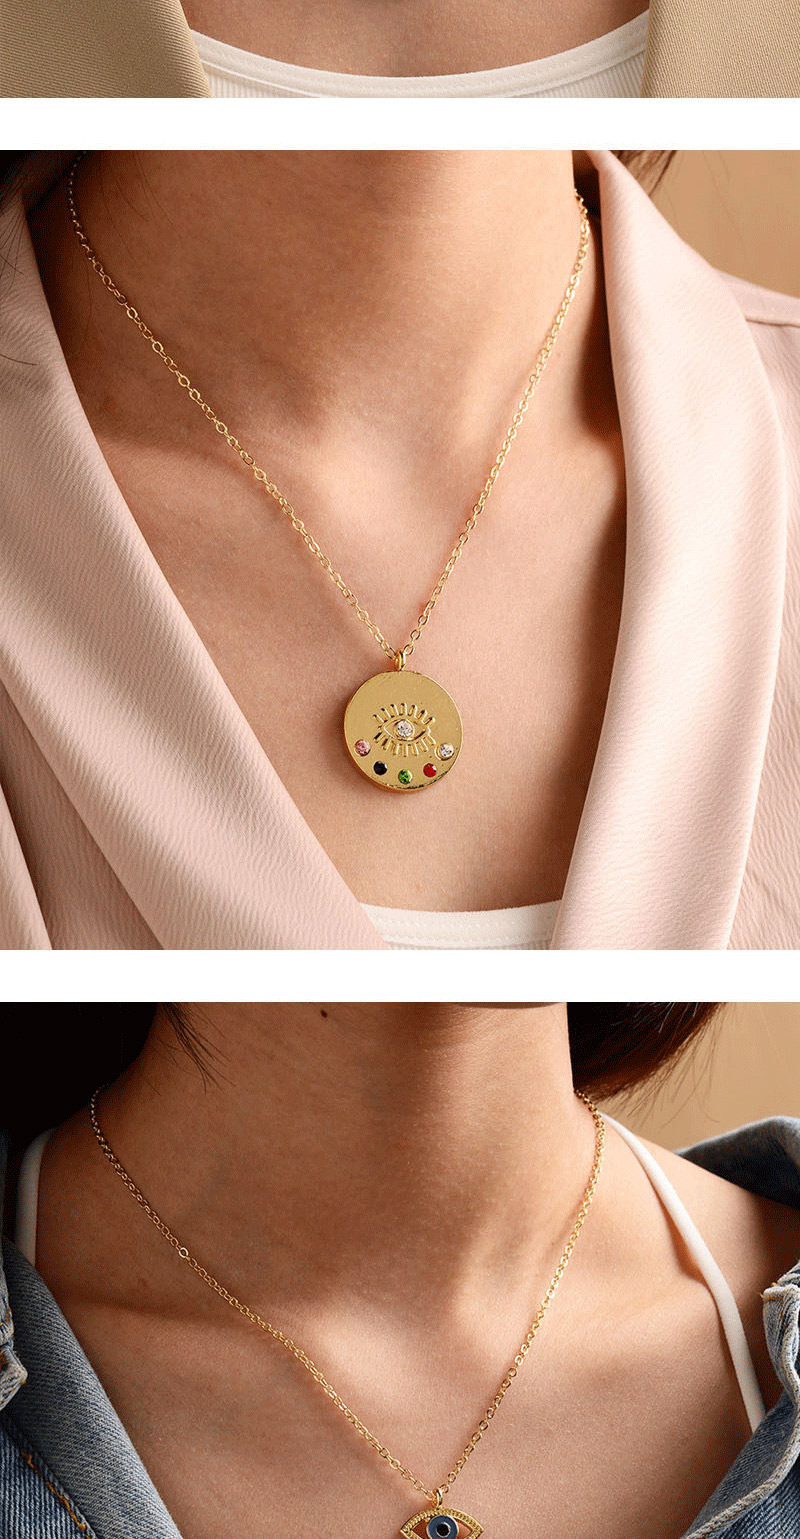 Fashion Blue Eyes Gold-plated Oil Drop Eyes And Diamond Hollow Bead Necklace,Pendants